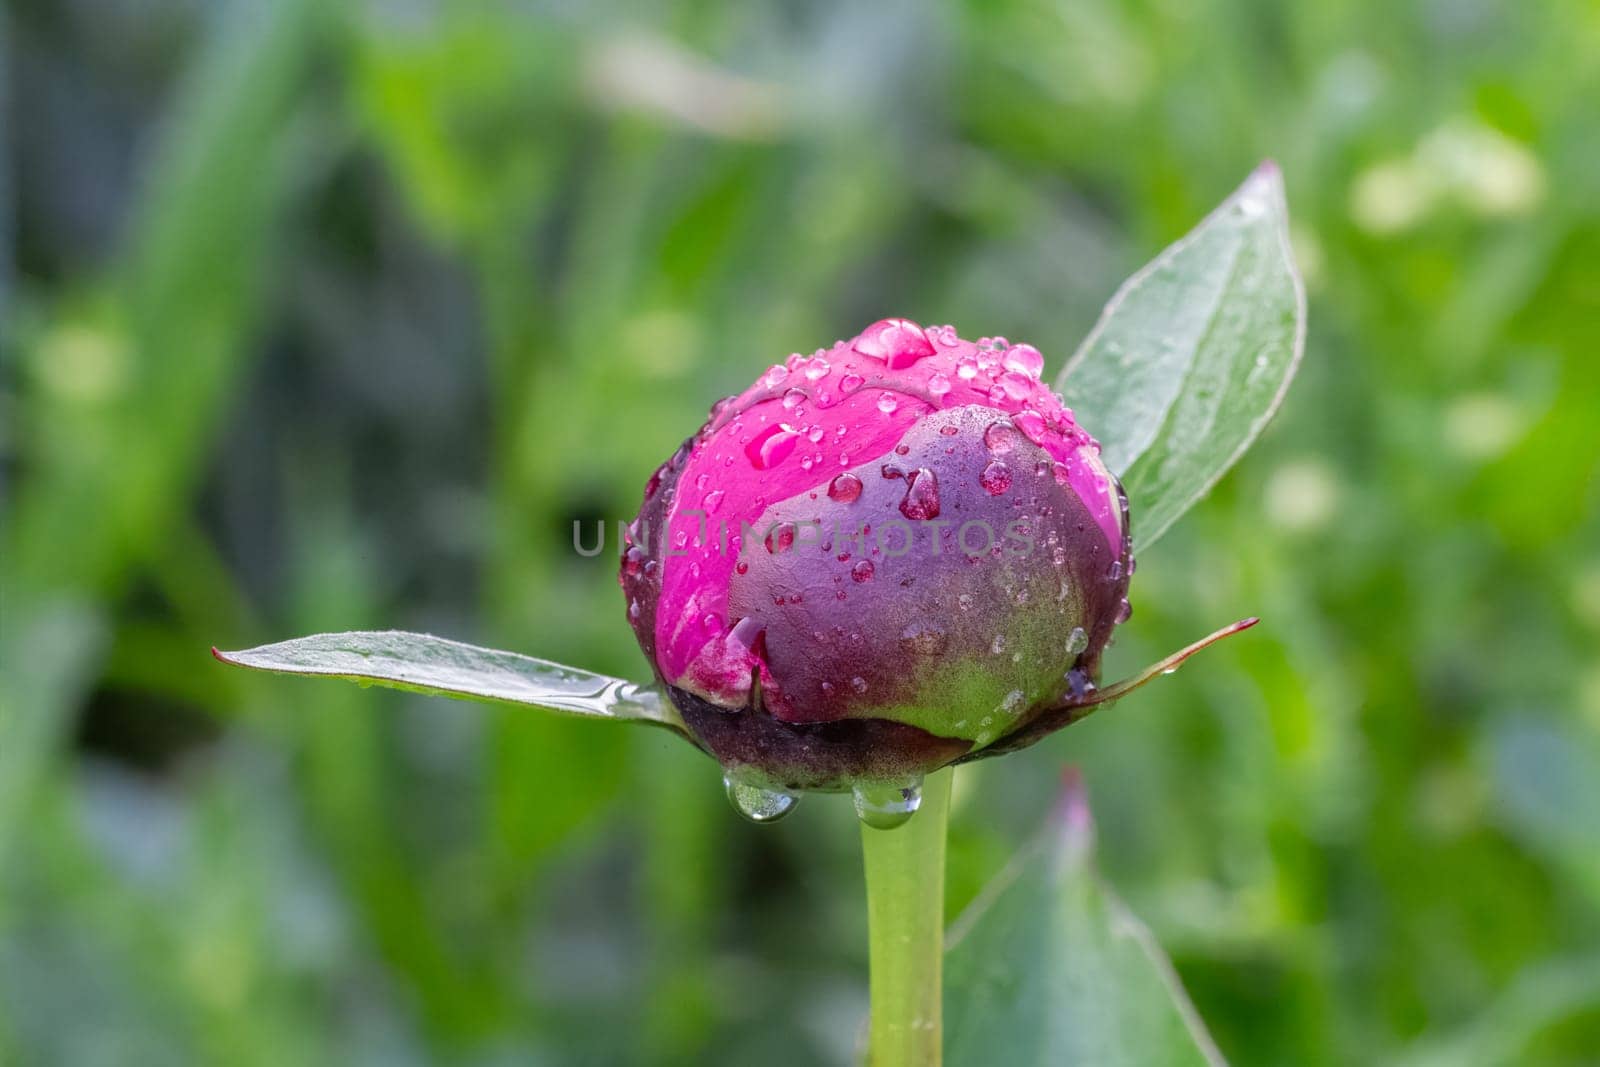 Pink peony bud on a stem with leaves on the blurred natural background. Shallow depth of field.